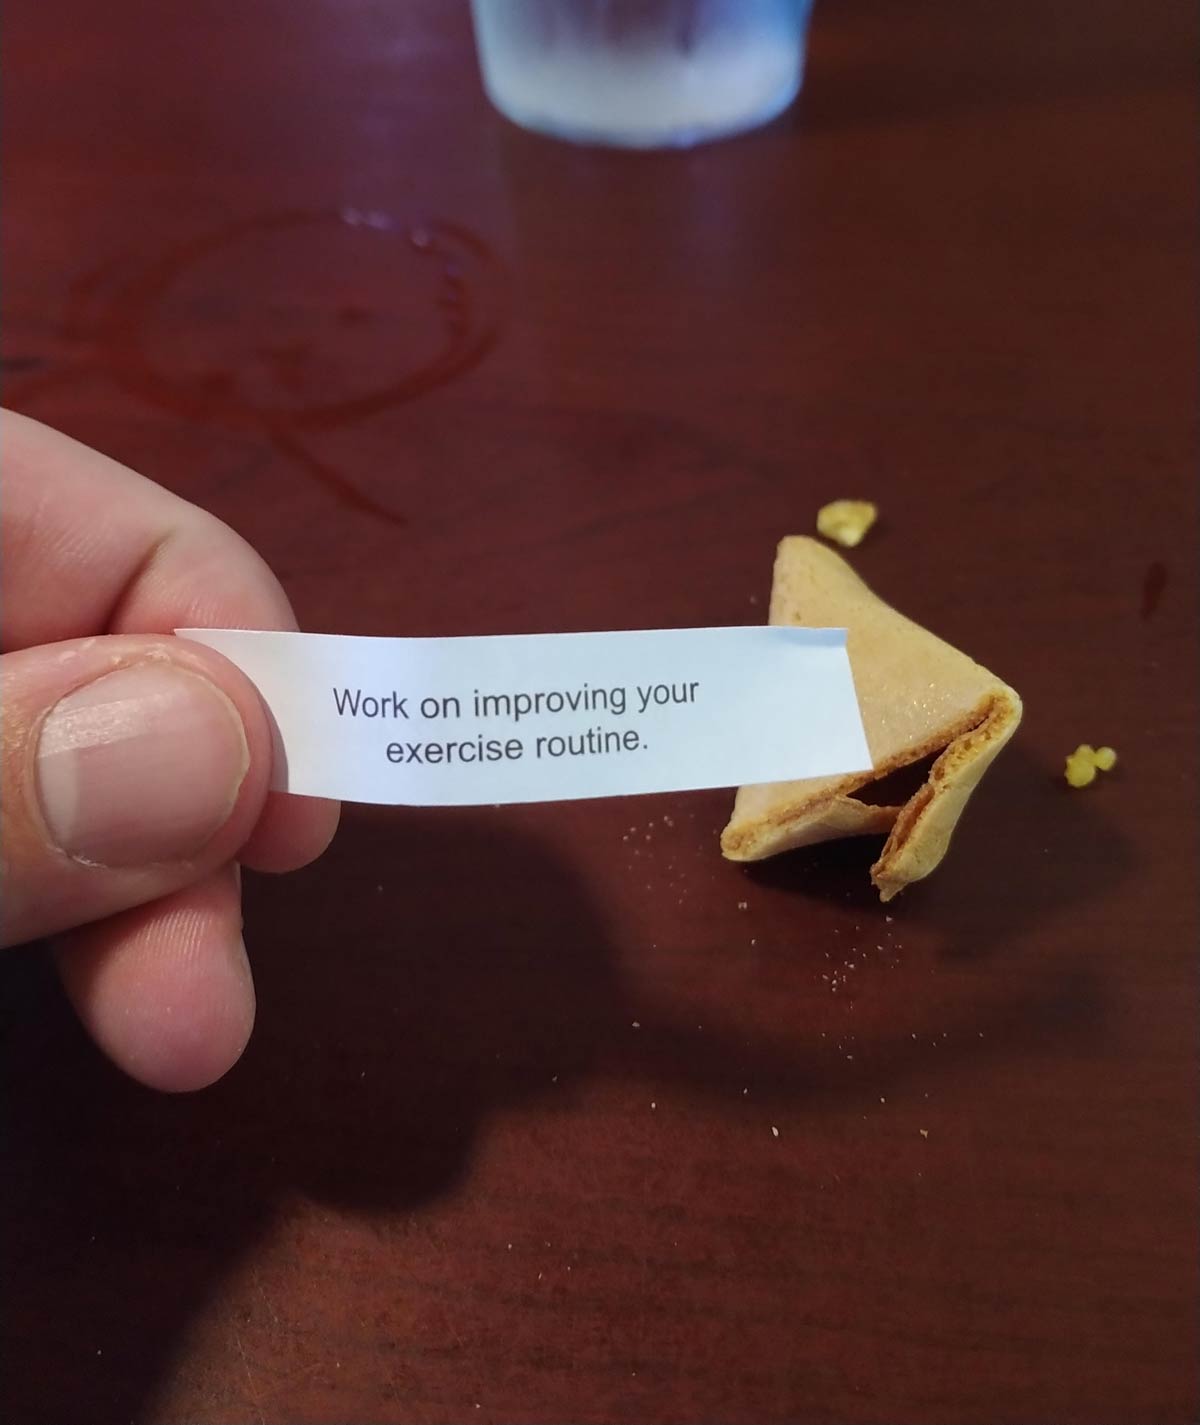 I skipped going to the gym today and ate out instead of cooking at home. This was my fortune cookie